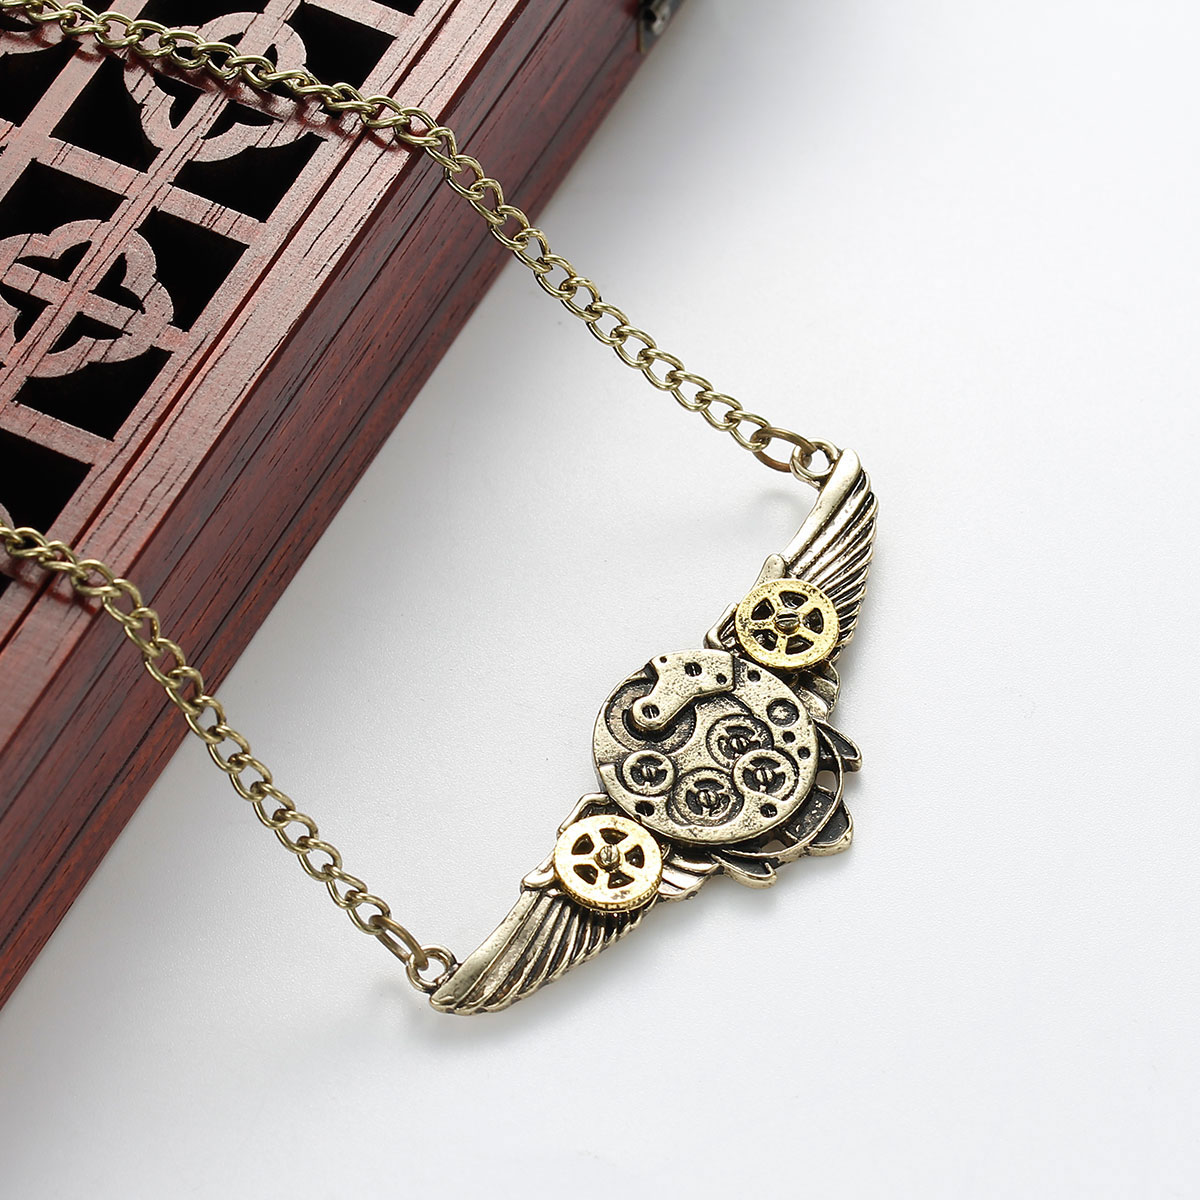 Picture of New Fashion Steampunk Necklace Link Curb Chain Antique Bronze Wing Gear Connector 64.2cm(25 2/8") long, 1 Piece